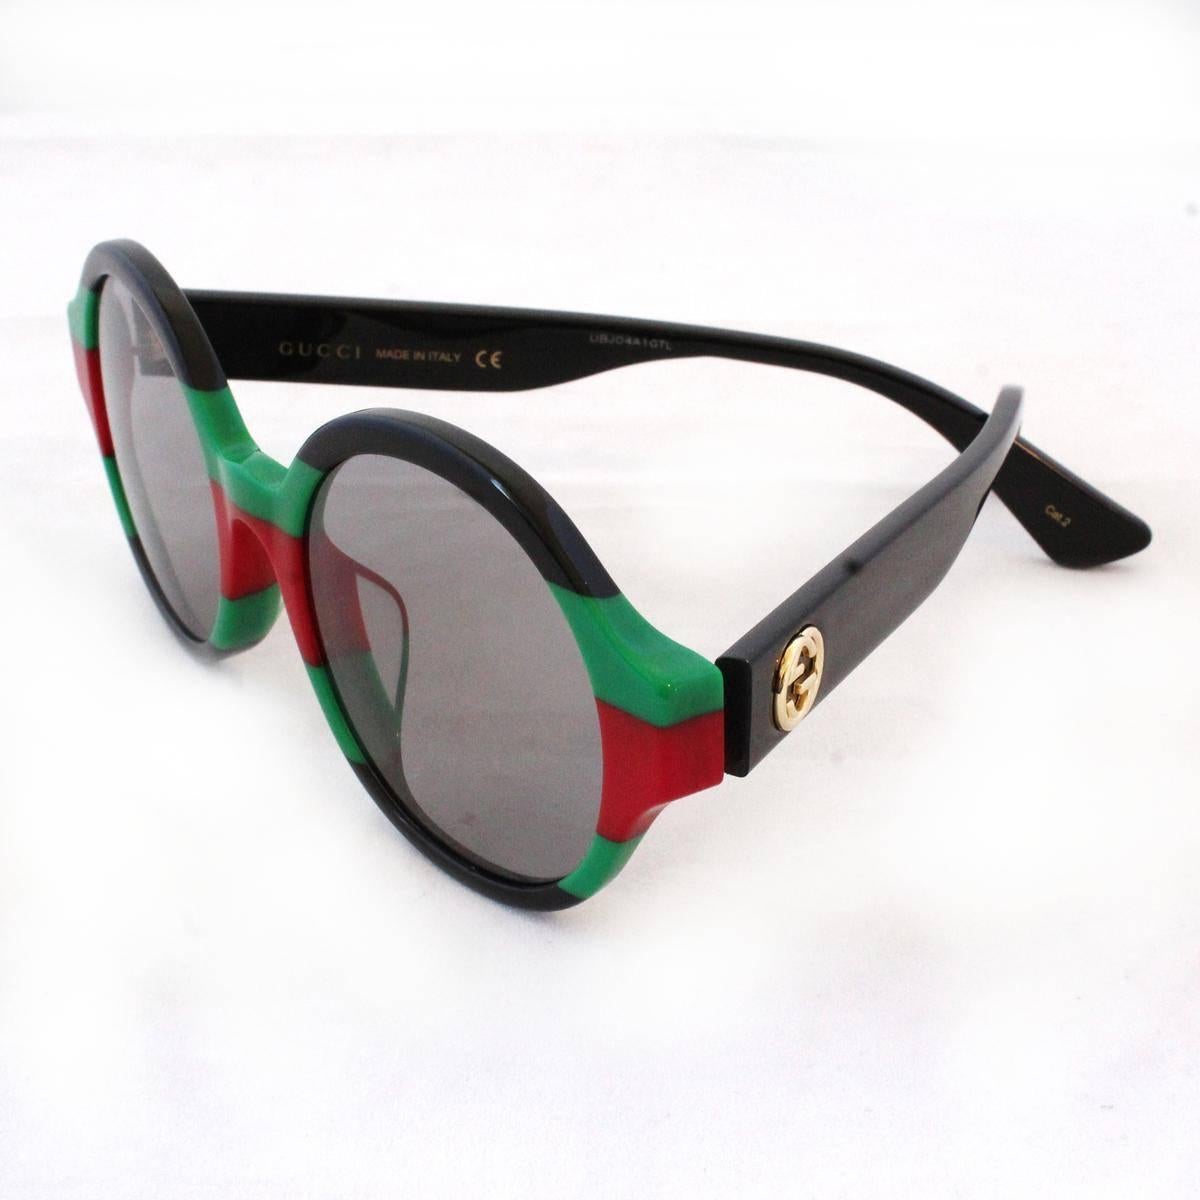 Brand new Gucci sunglasses
Round frames
Black, green and red color
With case
Width cm 14 (5.5 inches)
Condition: New with case
Worldwide express shipping included in the price !